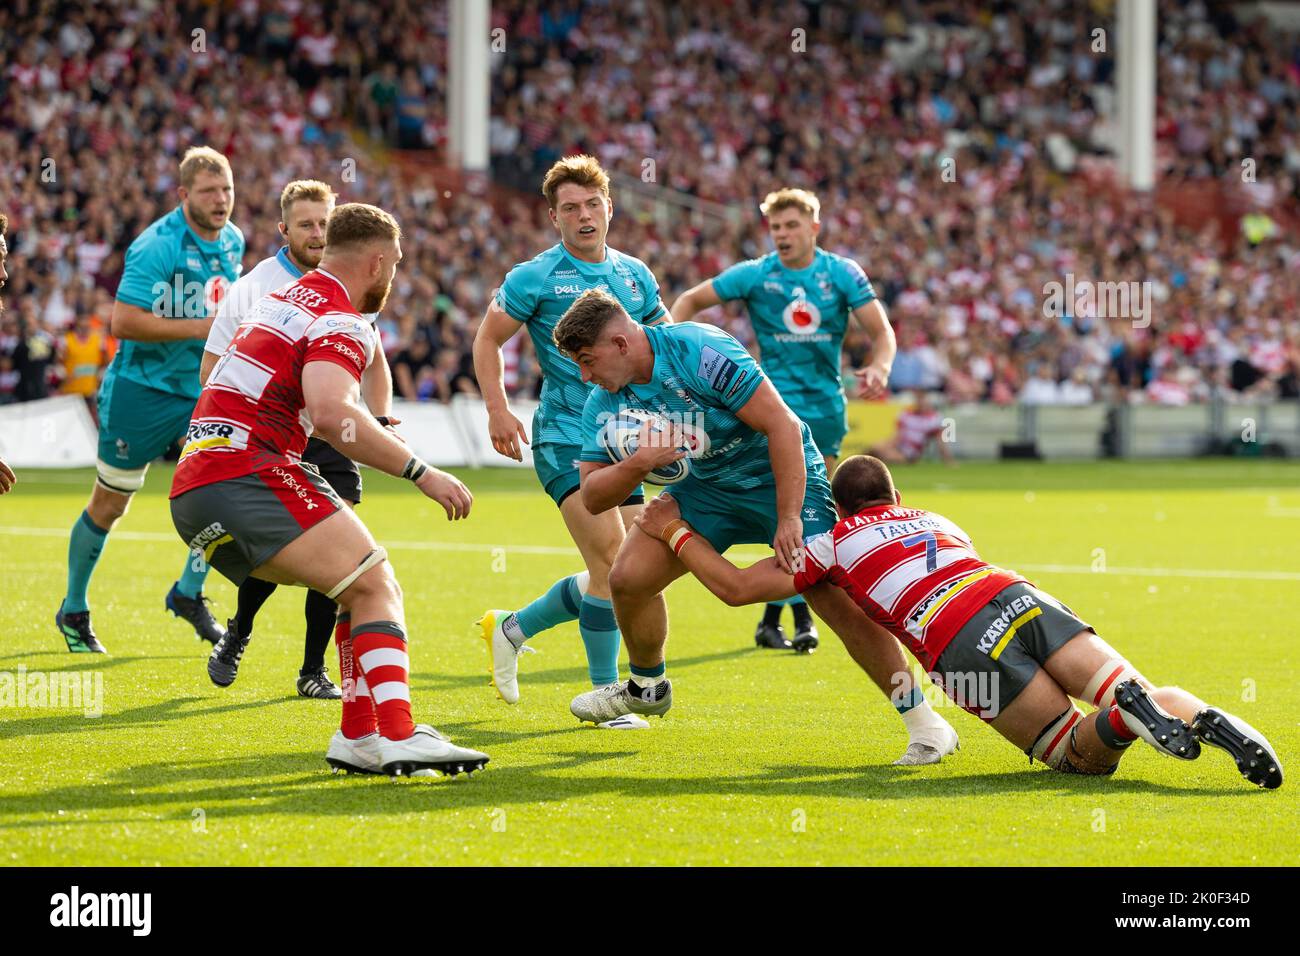 DaN Frost of Wasps Rugby è affrontato da Harry Taylor di Gloucester Rugby durante la partita Gallagher Premiership Gloucester Rugby vs Wasps al Kingsholm Stadium , Gloucester, Regno Unito, 11th settembre 2022 (Foto di Nick Browning/News Images) Foto Stock